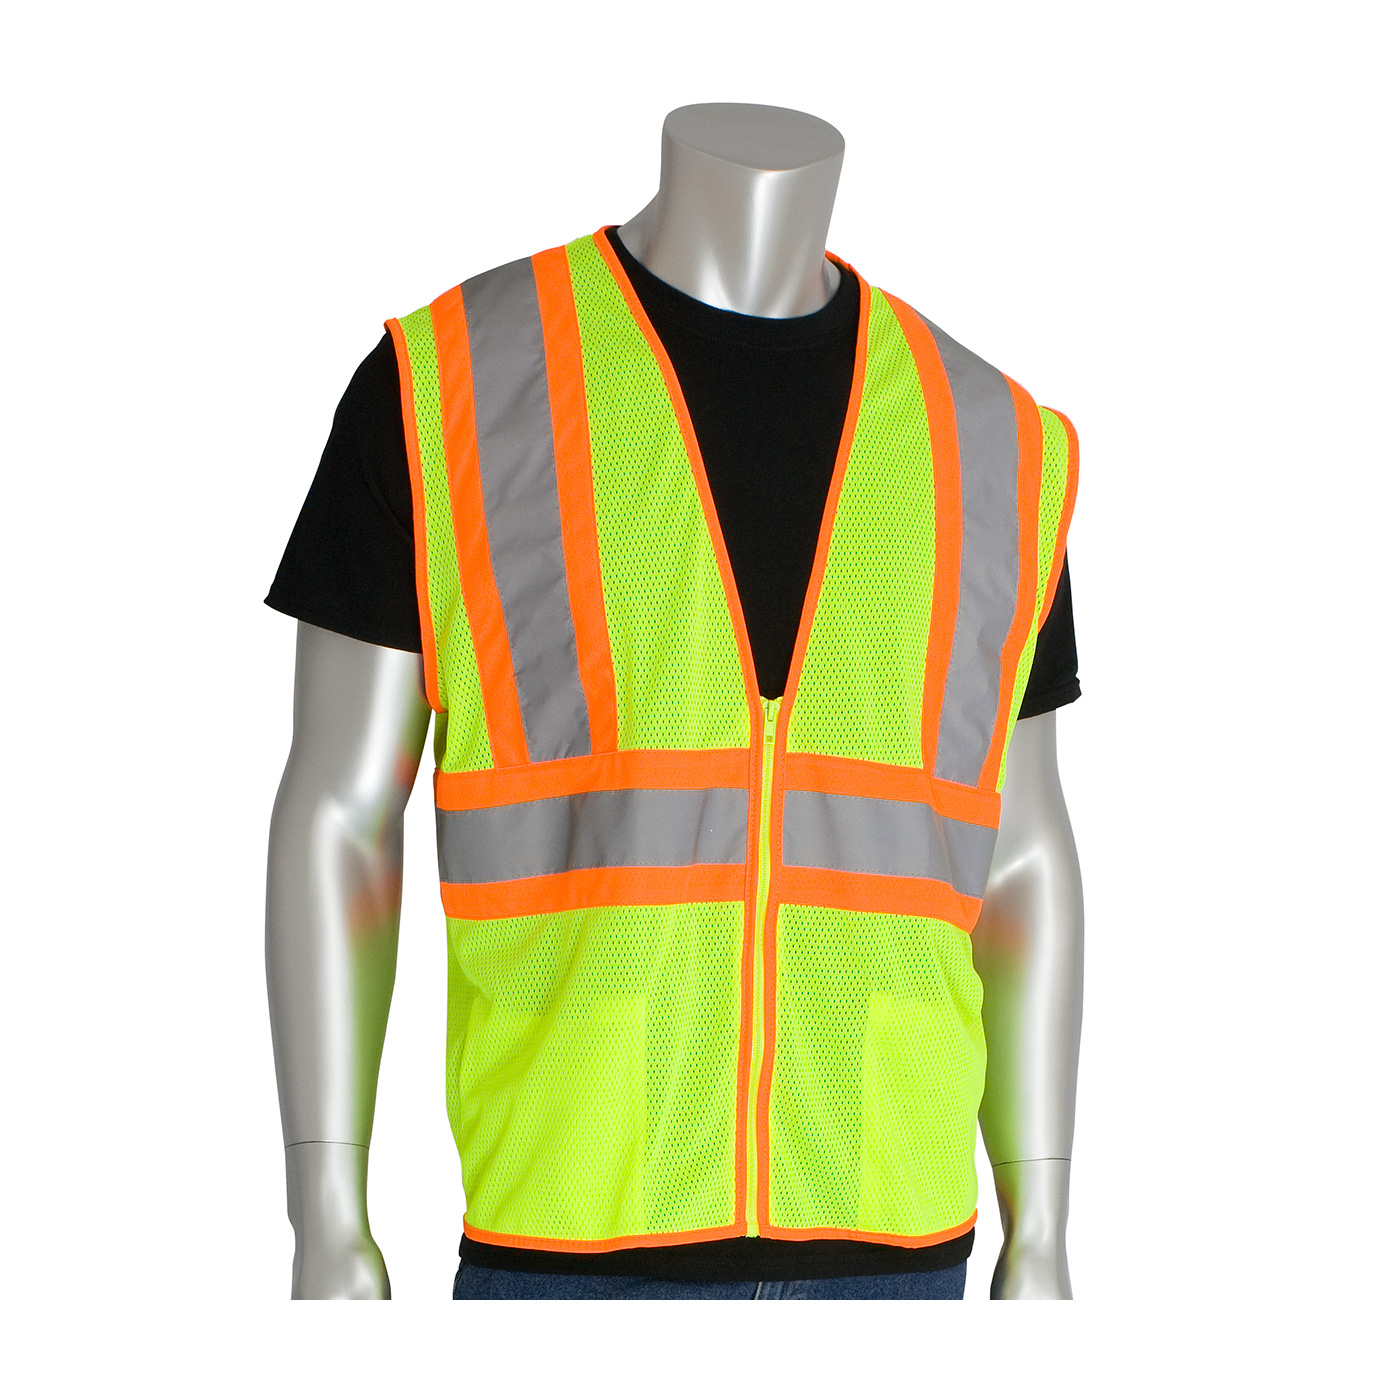 PIP 302-MVLY-3X ANSI Type R Class 2 Yellow Value Two-Tone Mesh Vest - 3X-Large PID-302 MVLY 3X